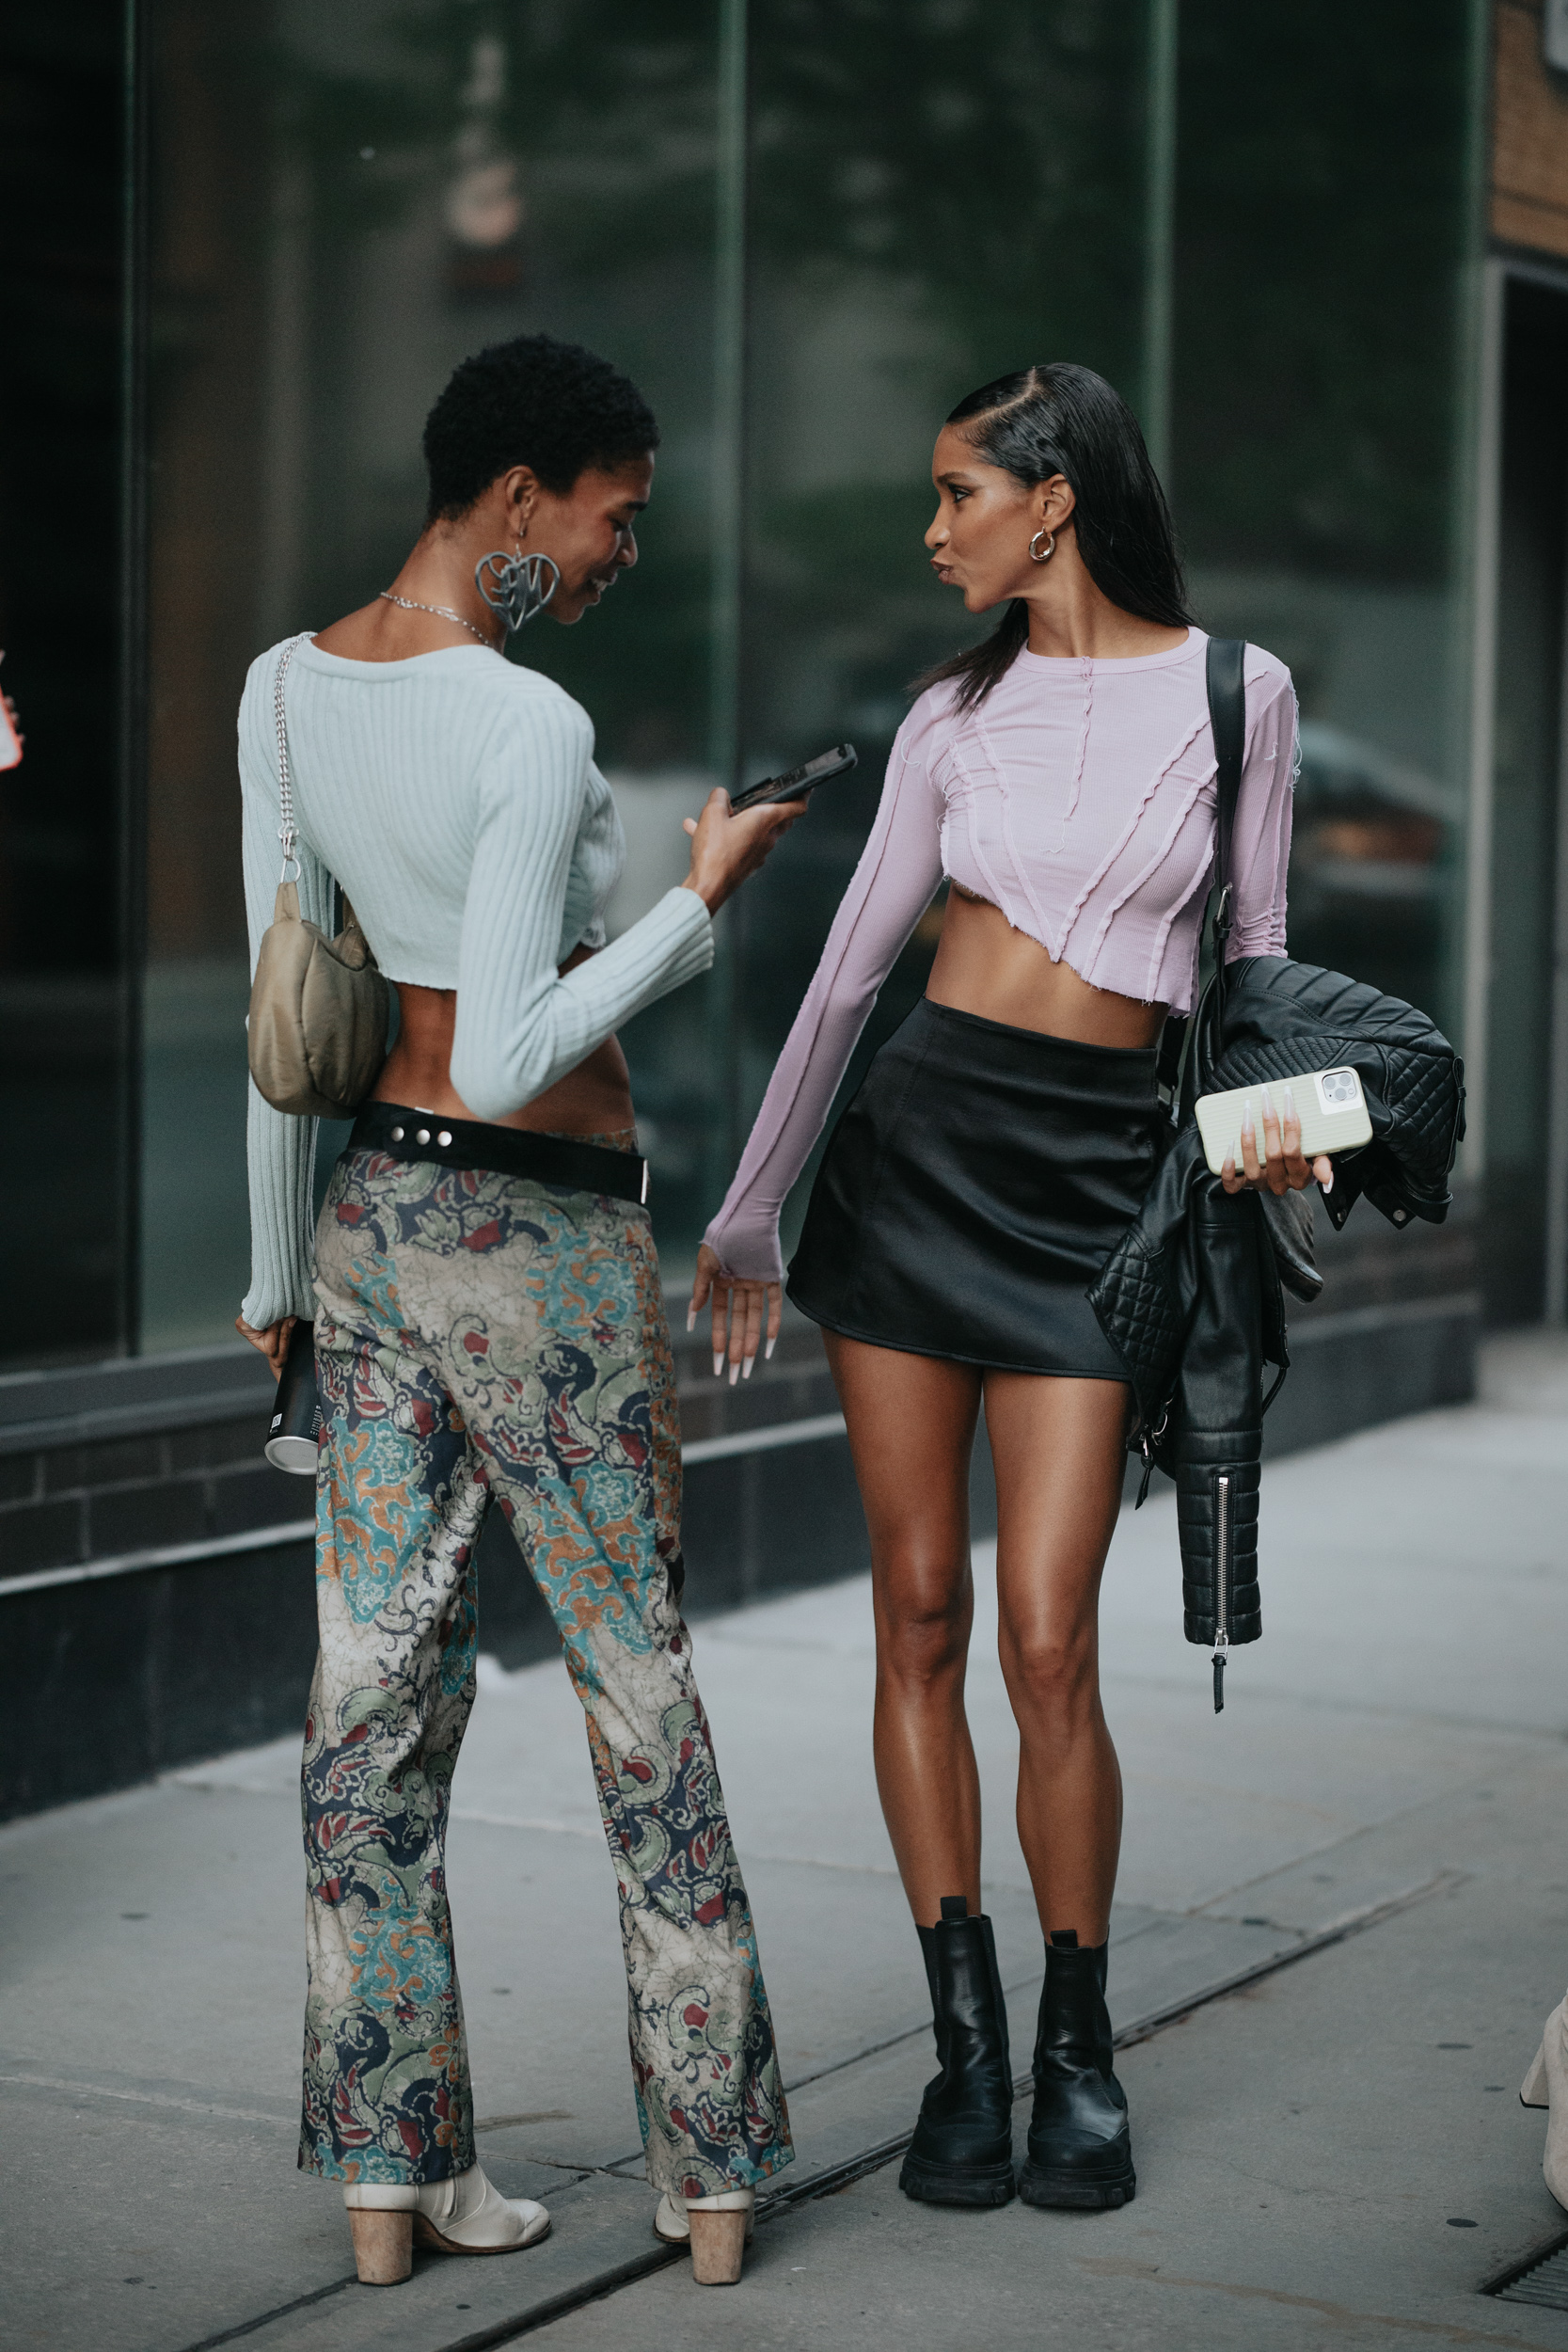 The New Faces of Street Style in 2023